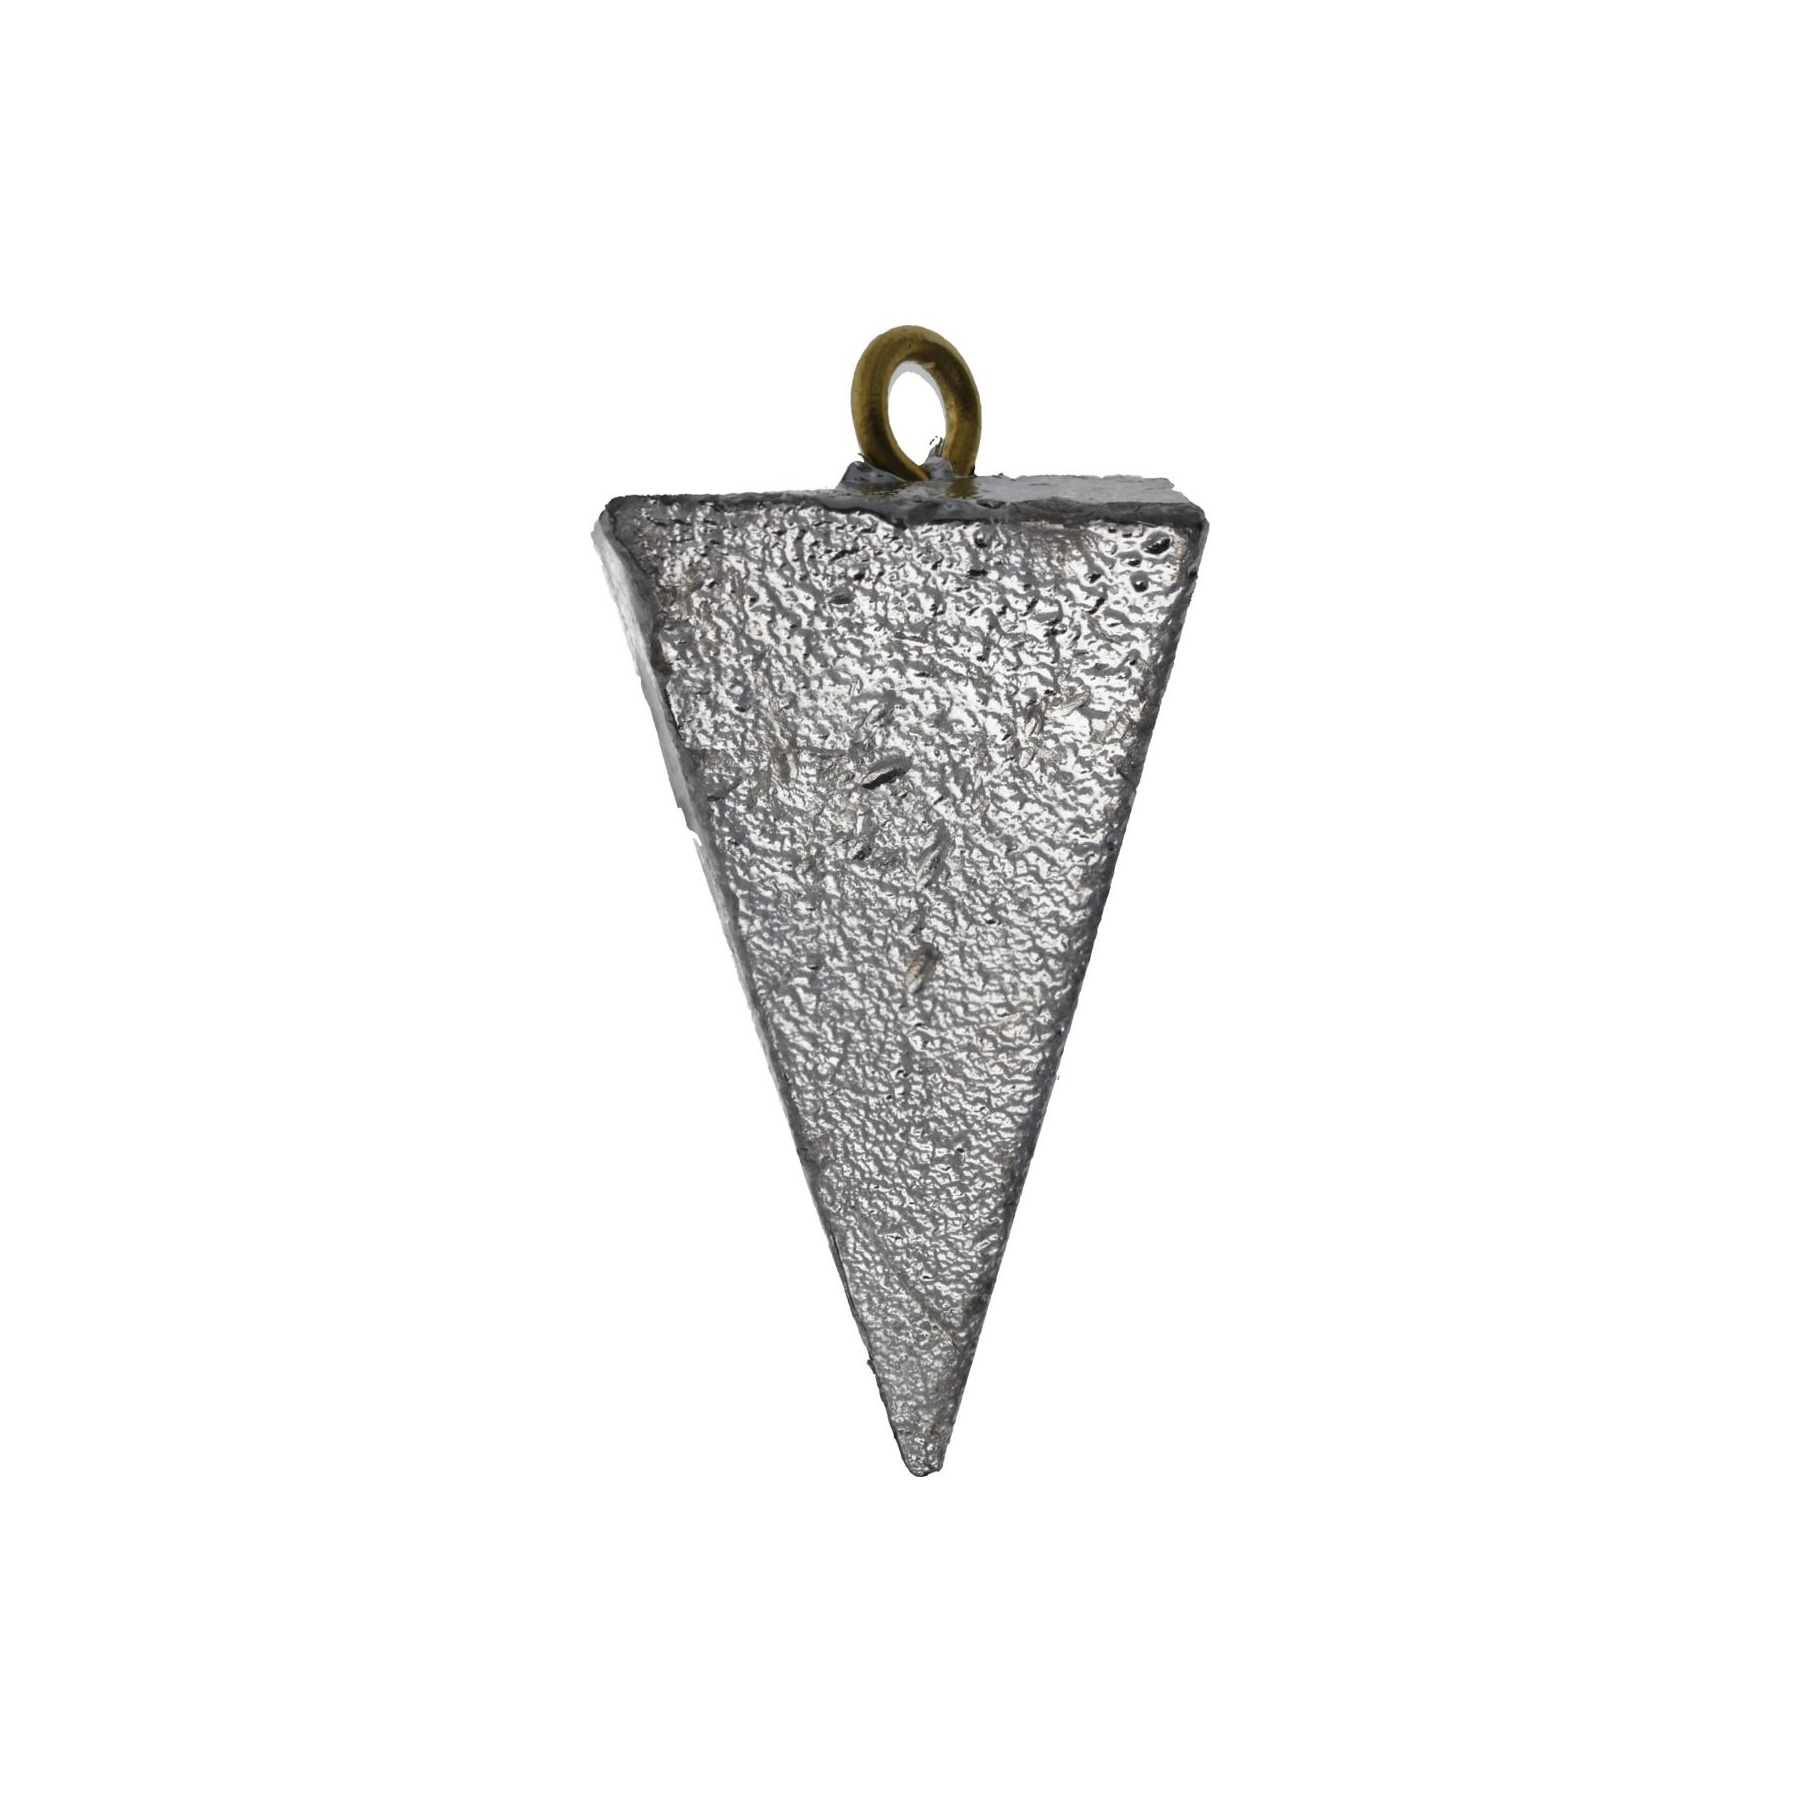 https://wilcor.net/productimages/fsh0591_pyramid_sinkers_2oz.jpg